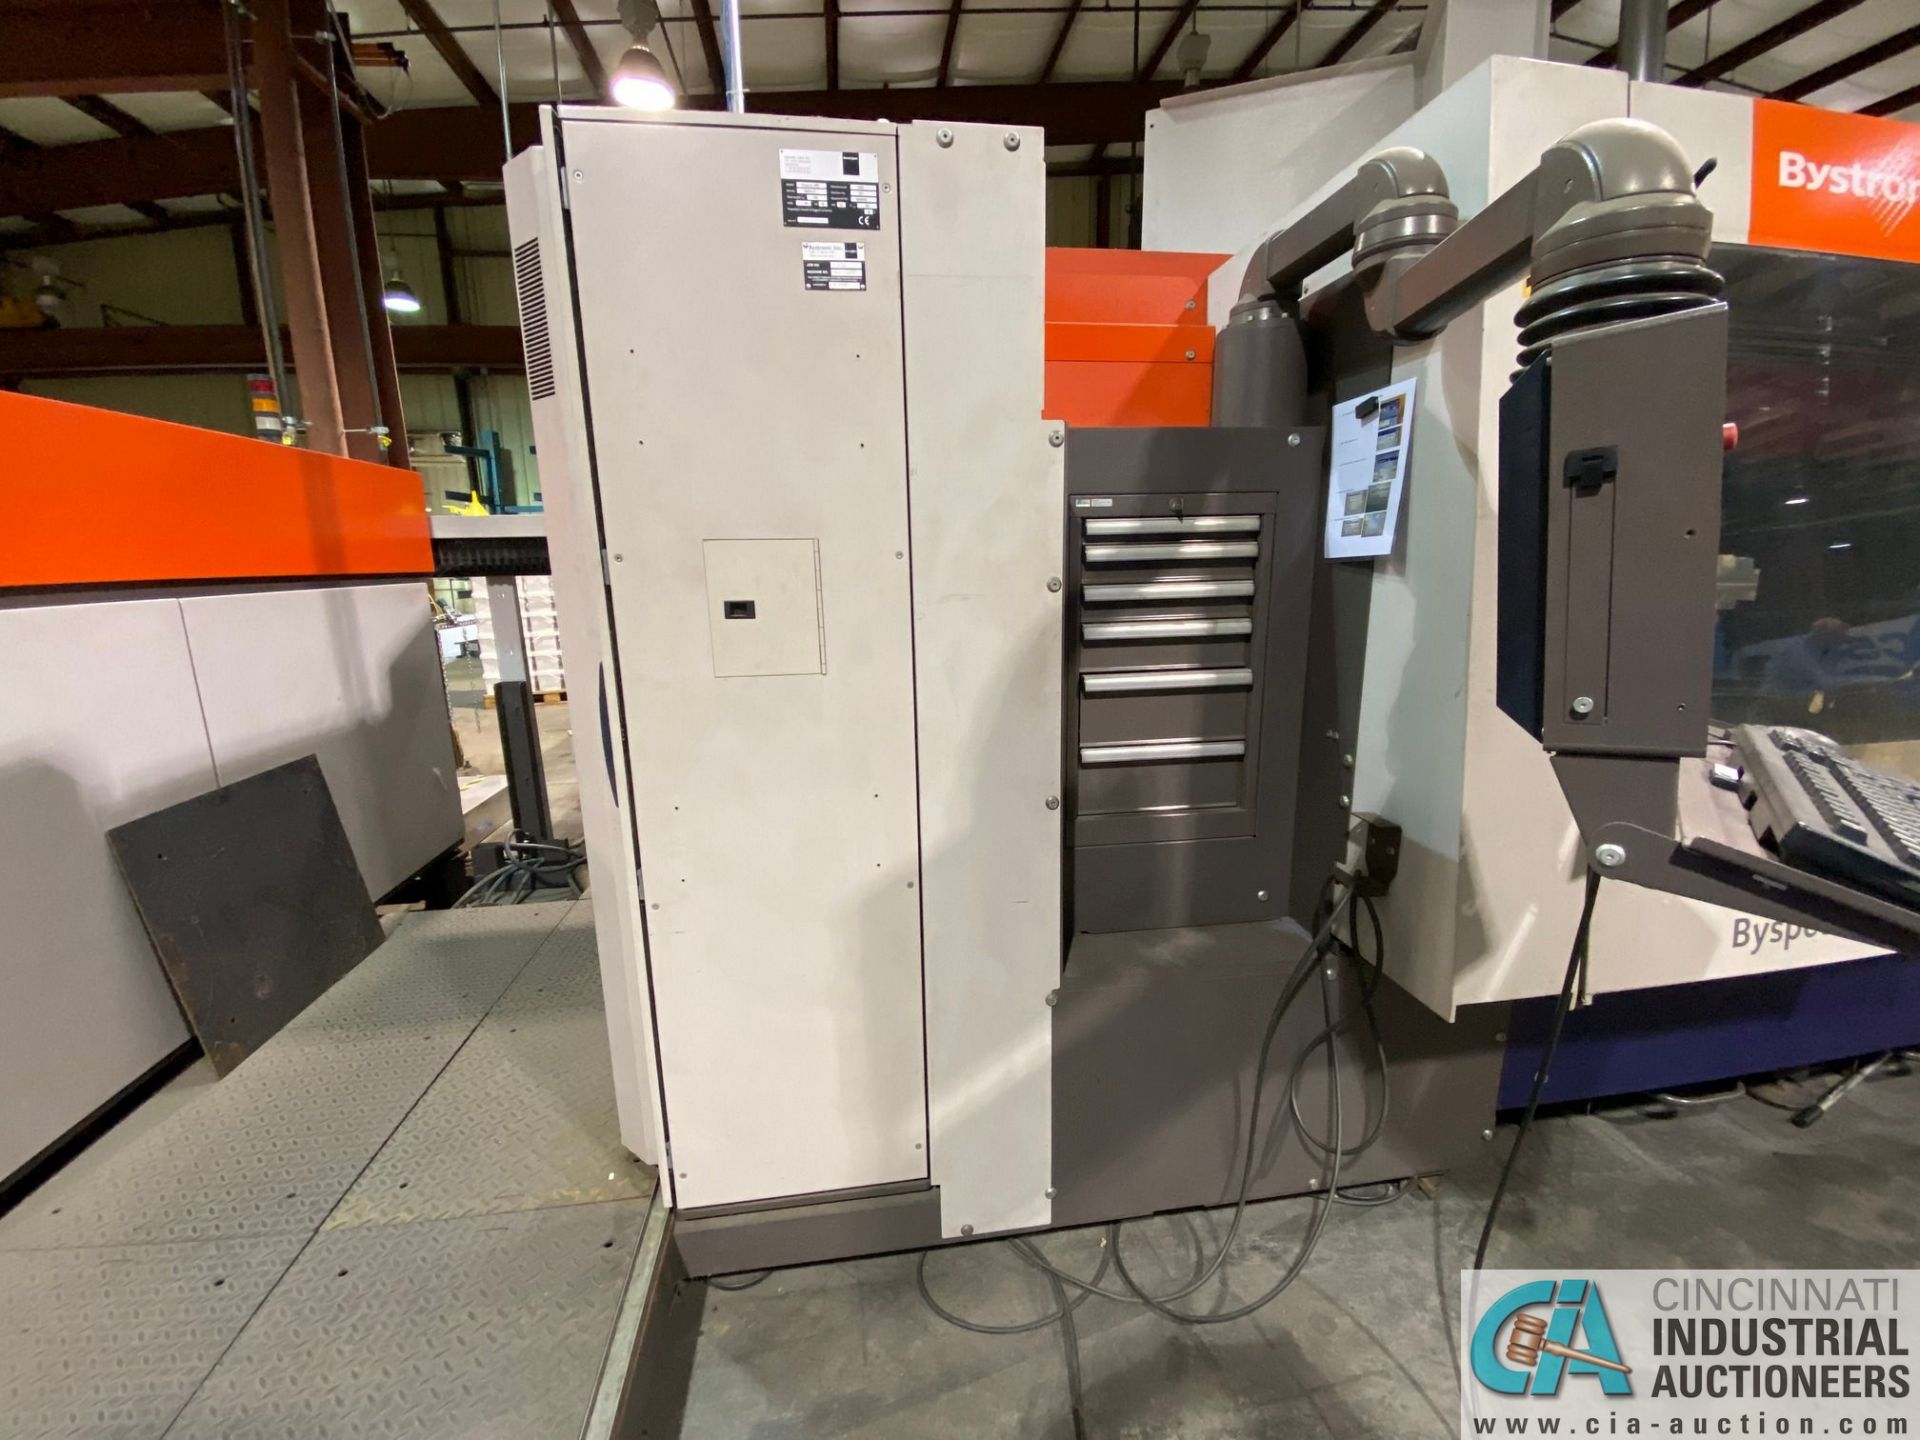 4,400-WATT BYSTRONIC BYSPEED 3015 SHUTTLE TABLE CNC LASER W/ LOADER; S/N 612, RESONATOR AND TURBO - Image 9 of 20